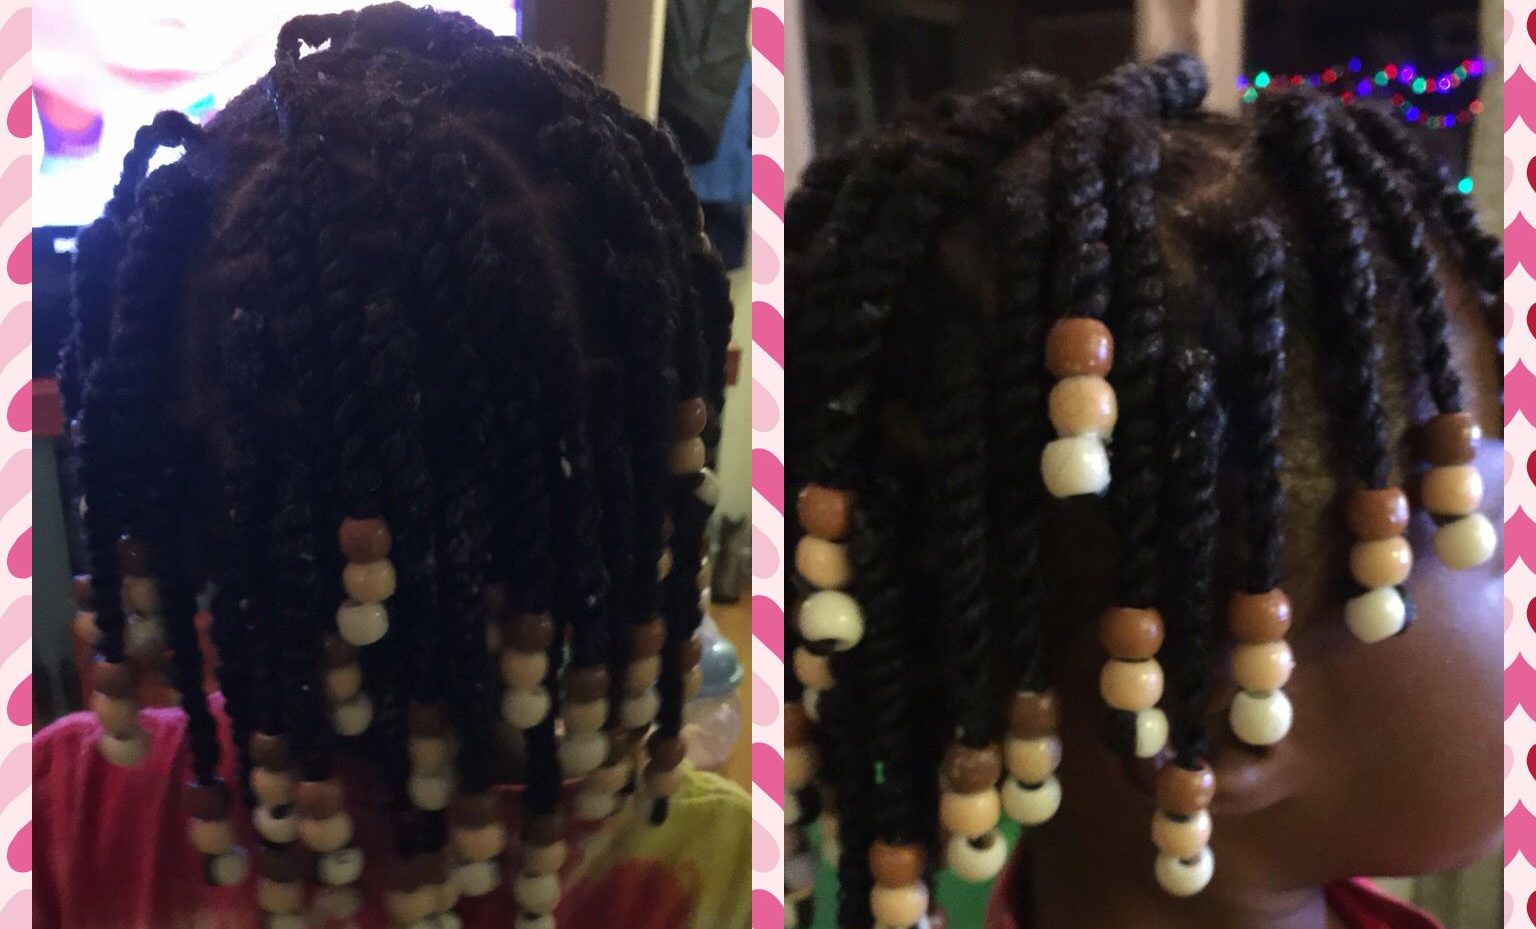 20 Safe and Easy African Kids Hairstyles